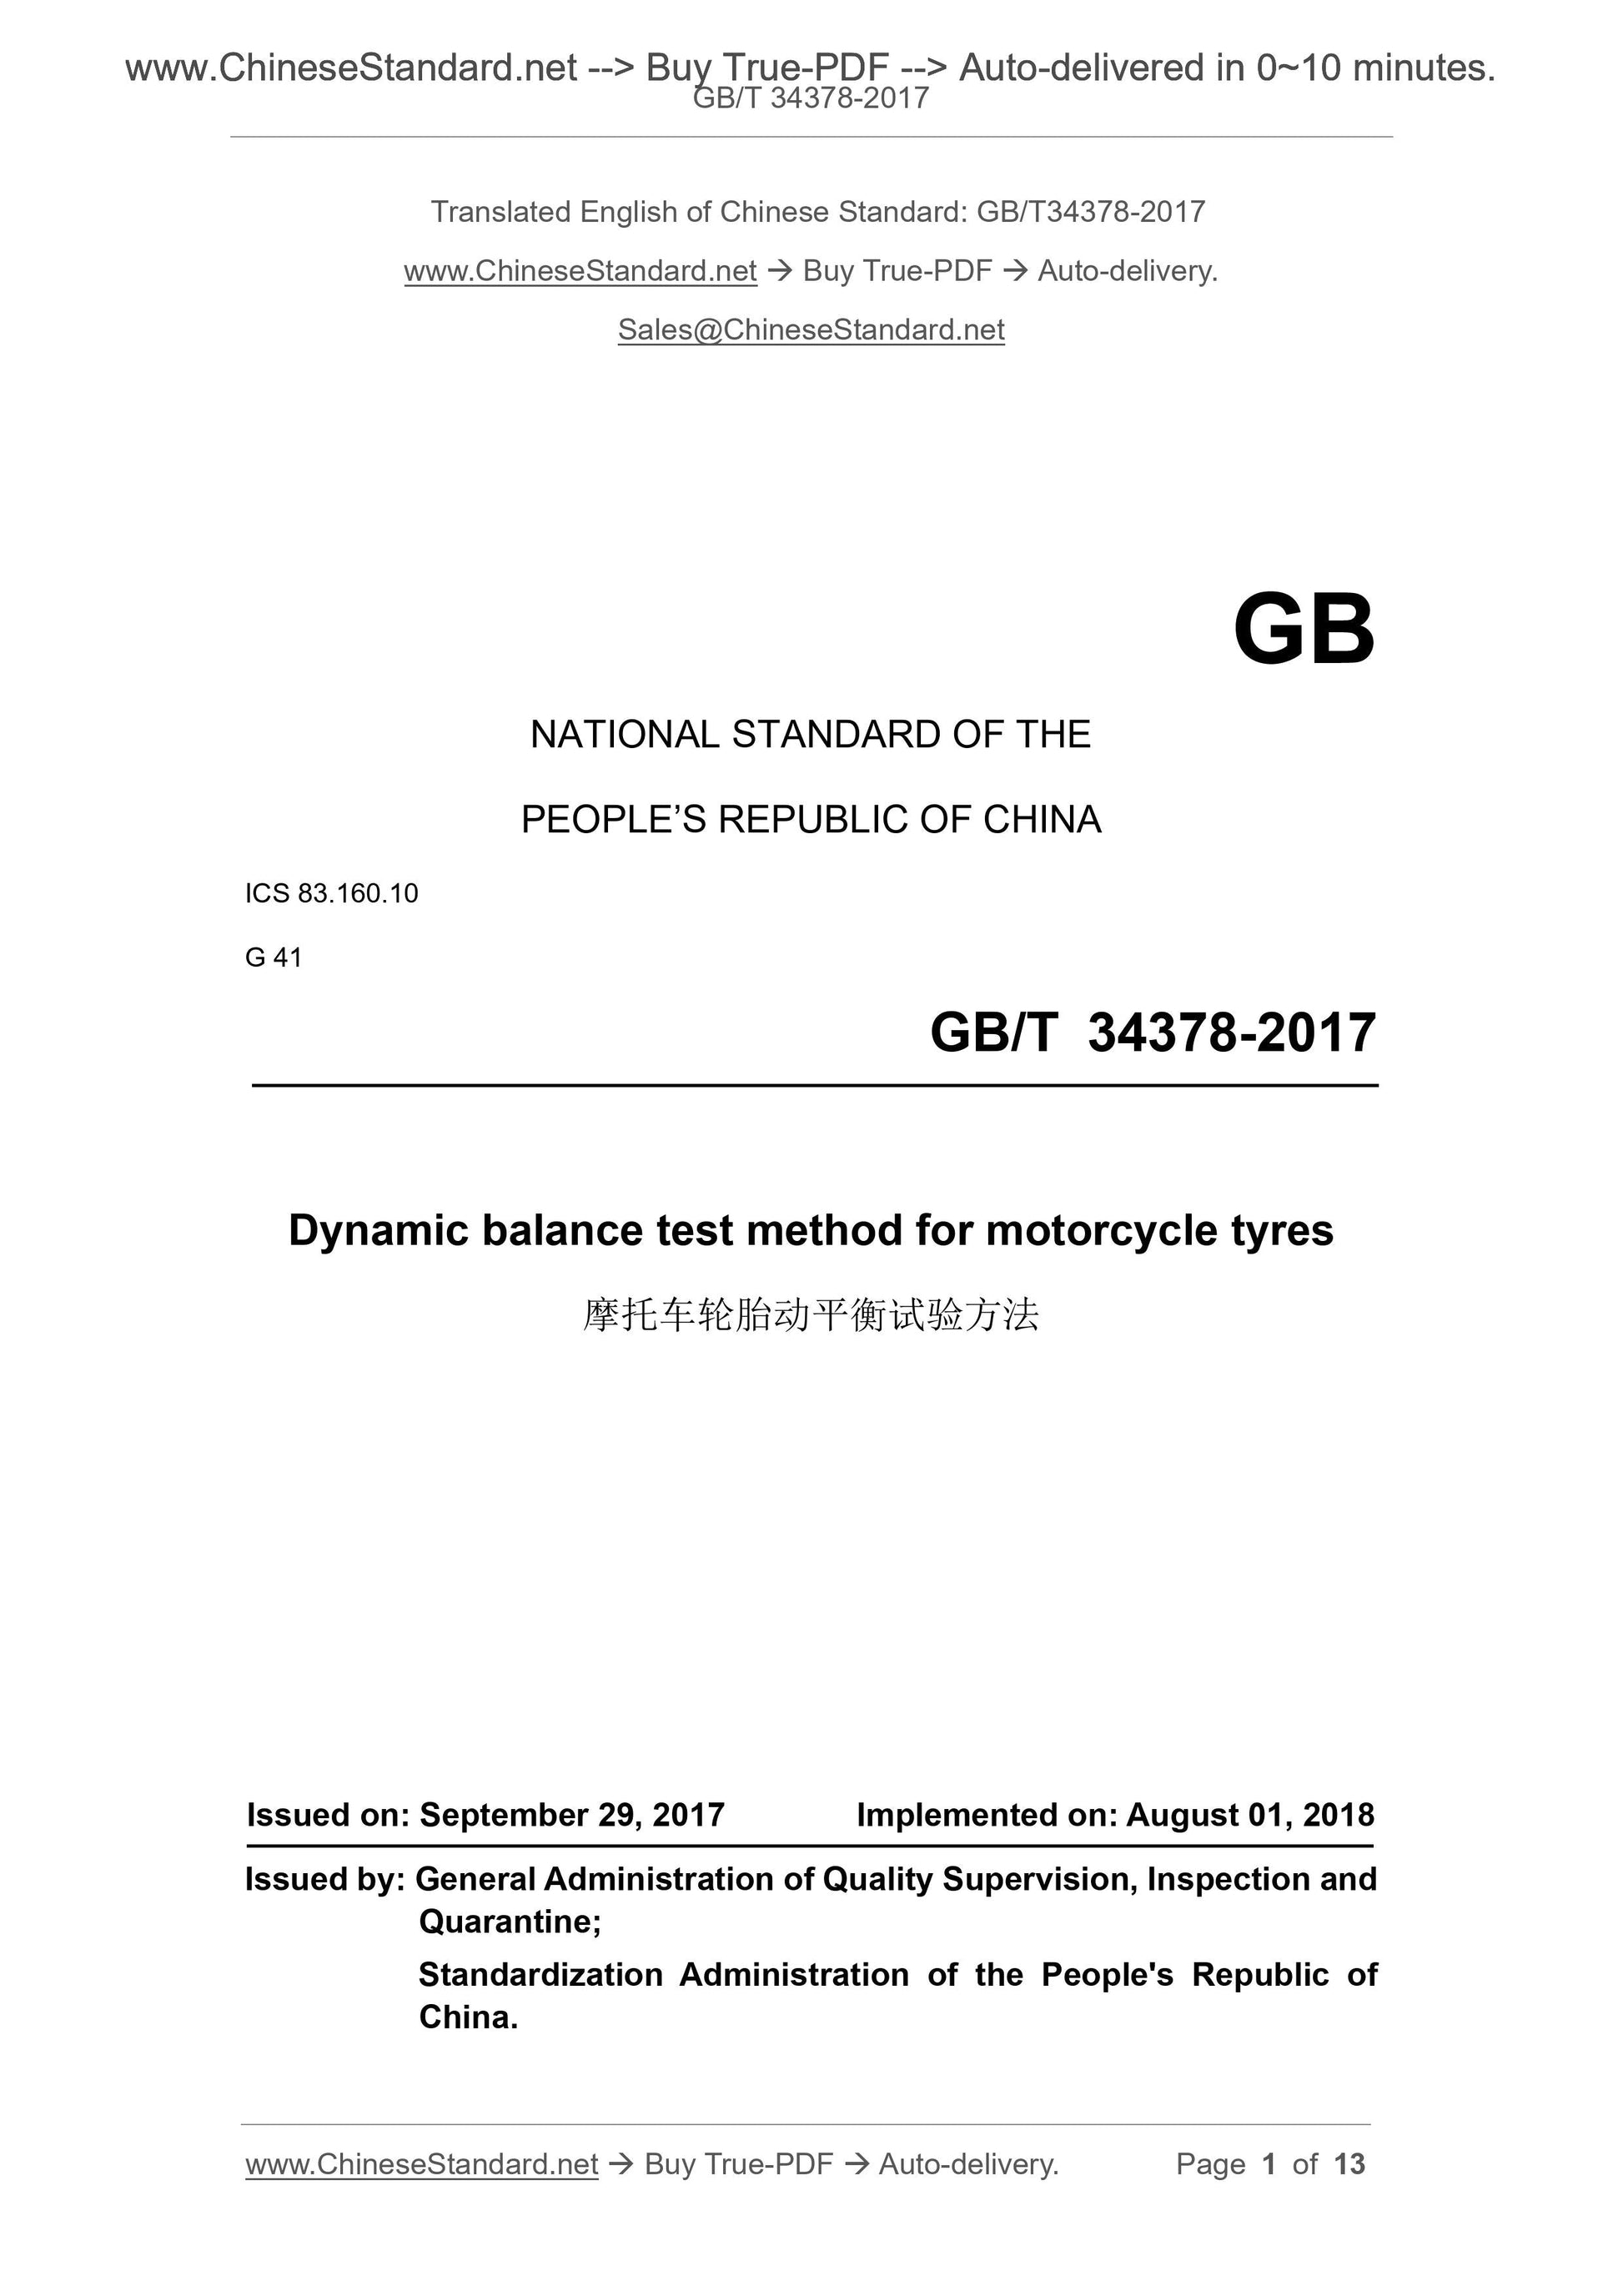 GB/T 34378-2017 Page 1